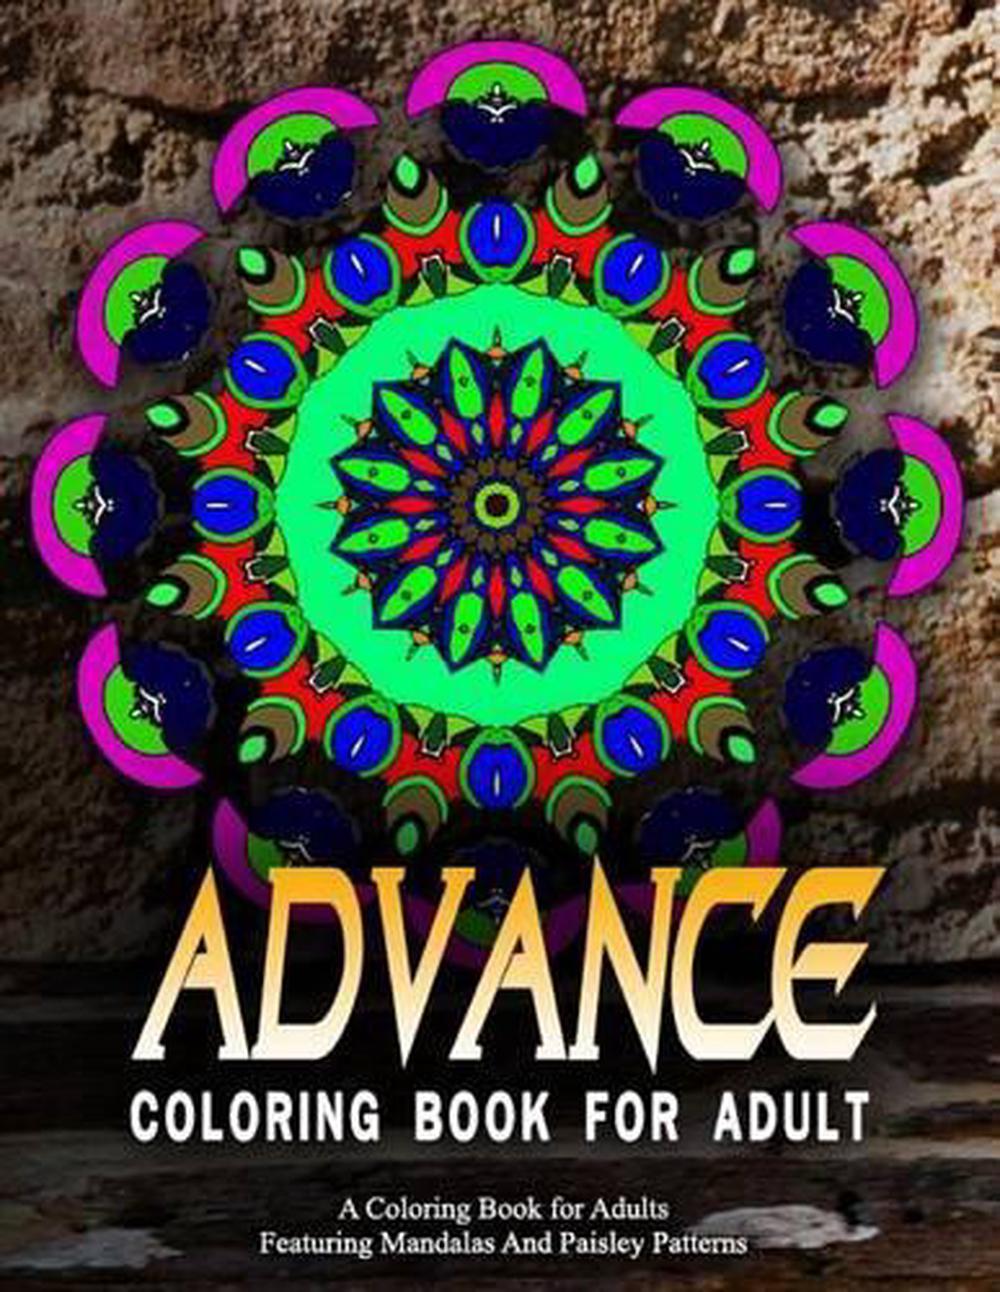 ADVANCED-COLORING-BOOKS-FOR-ADULTS--Vol20-adult-coloring-books-best-sellers-for-women-Volume-20